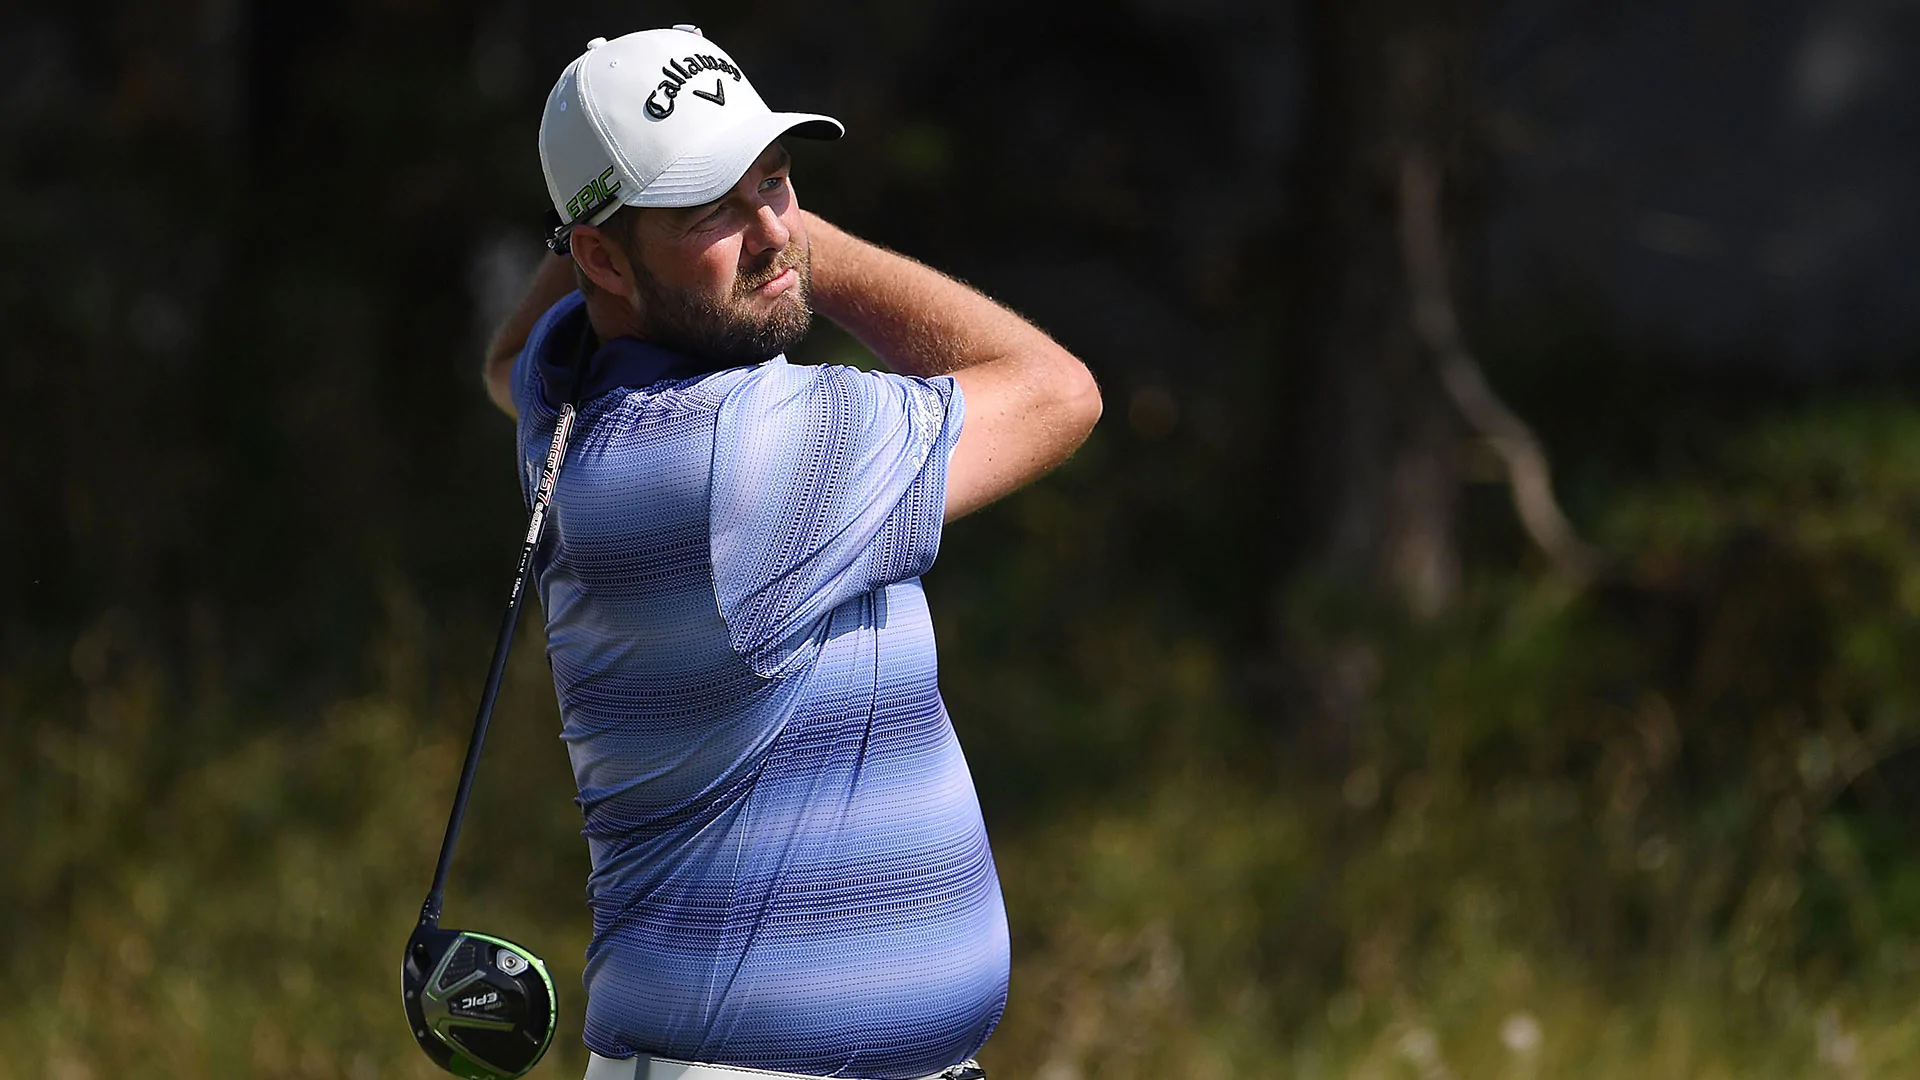 Leishman keeps momentum going with 9-under 62